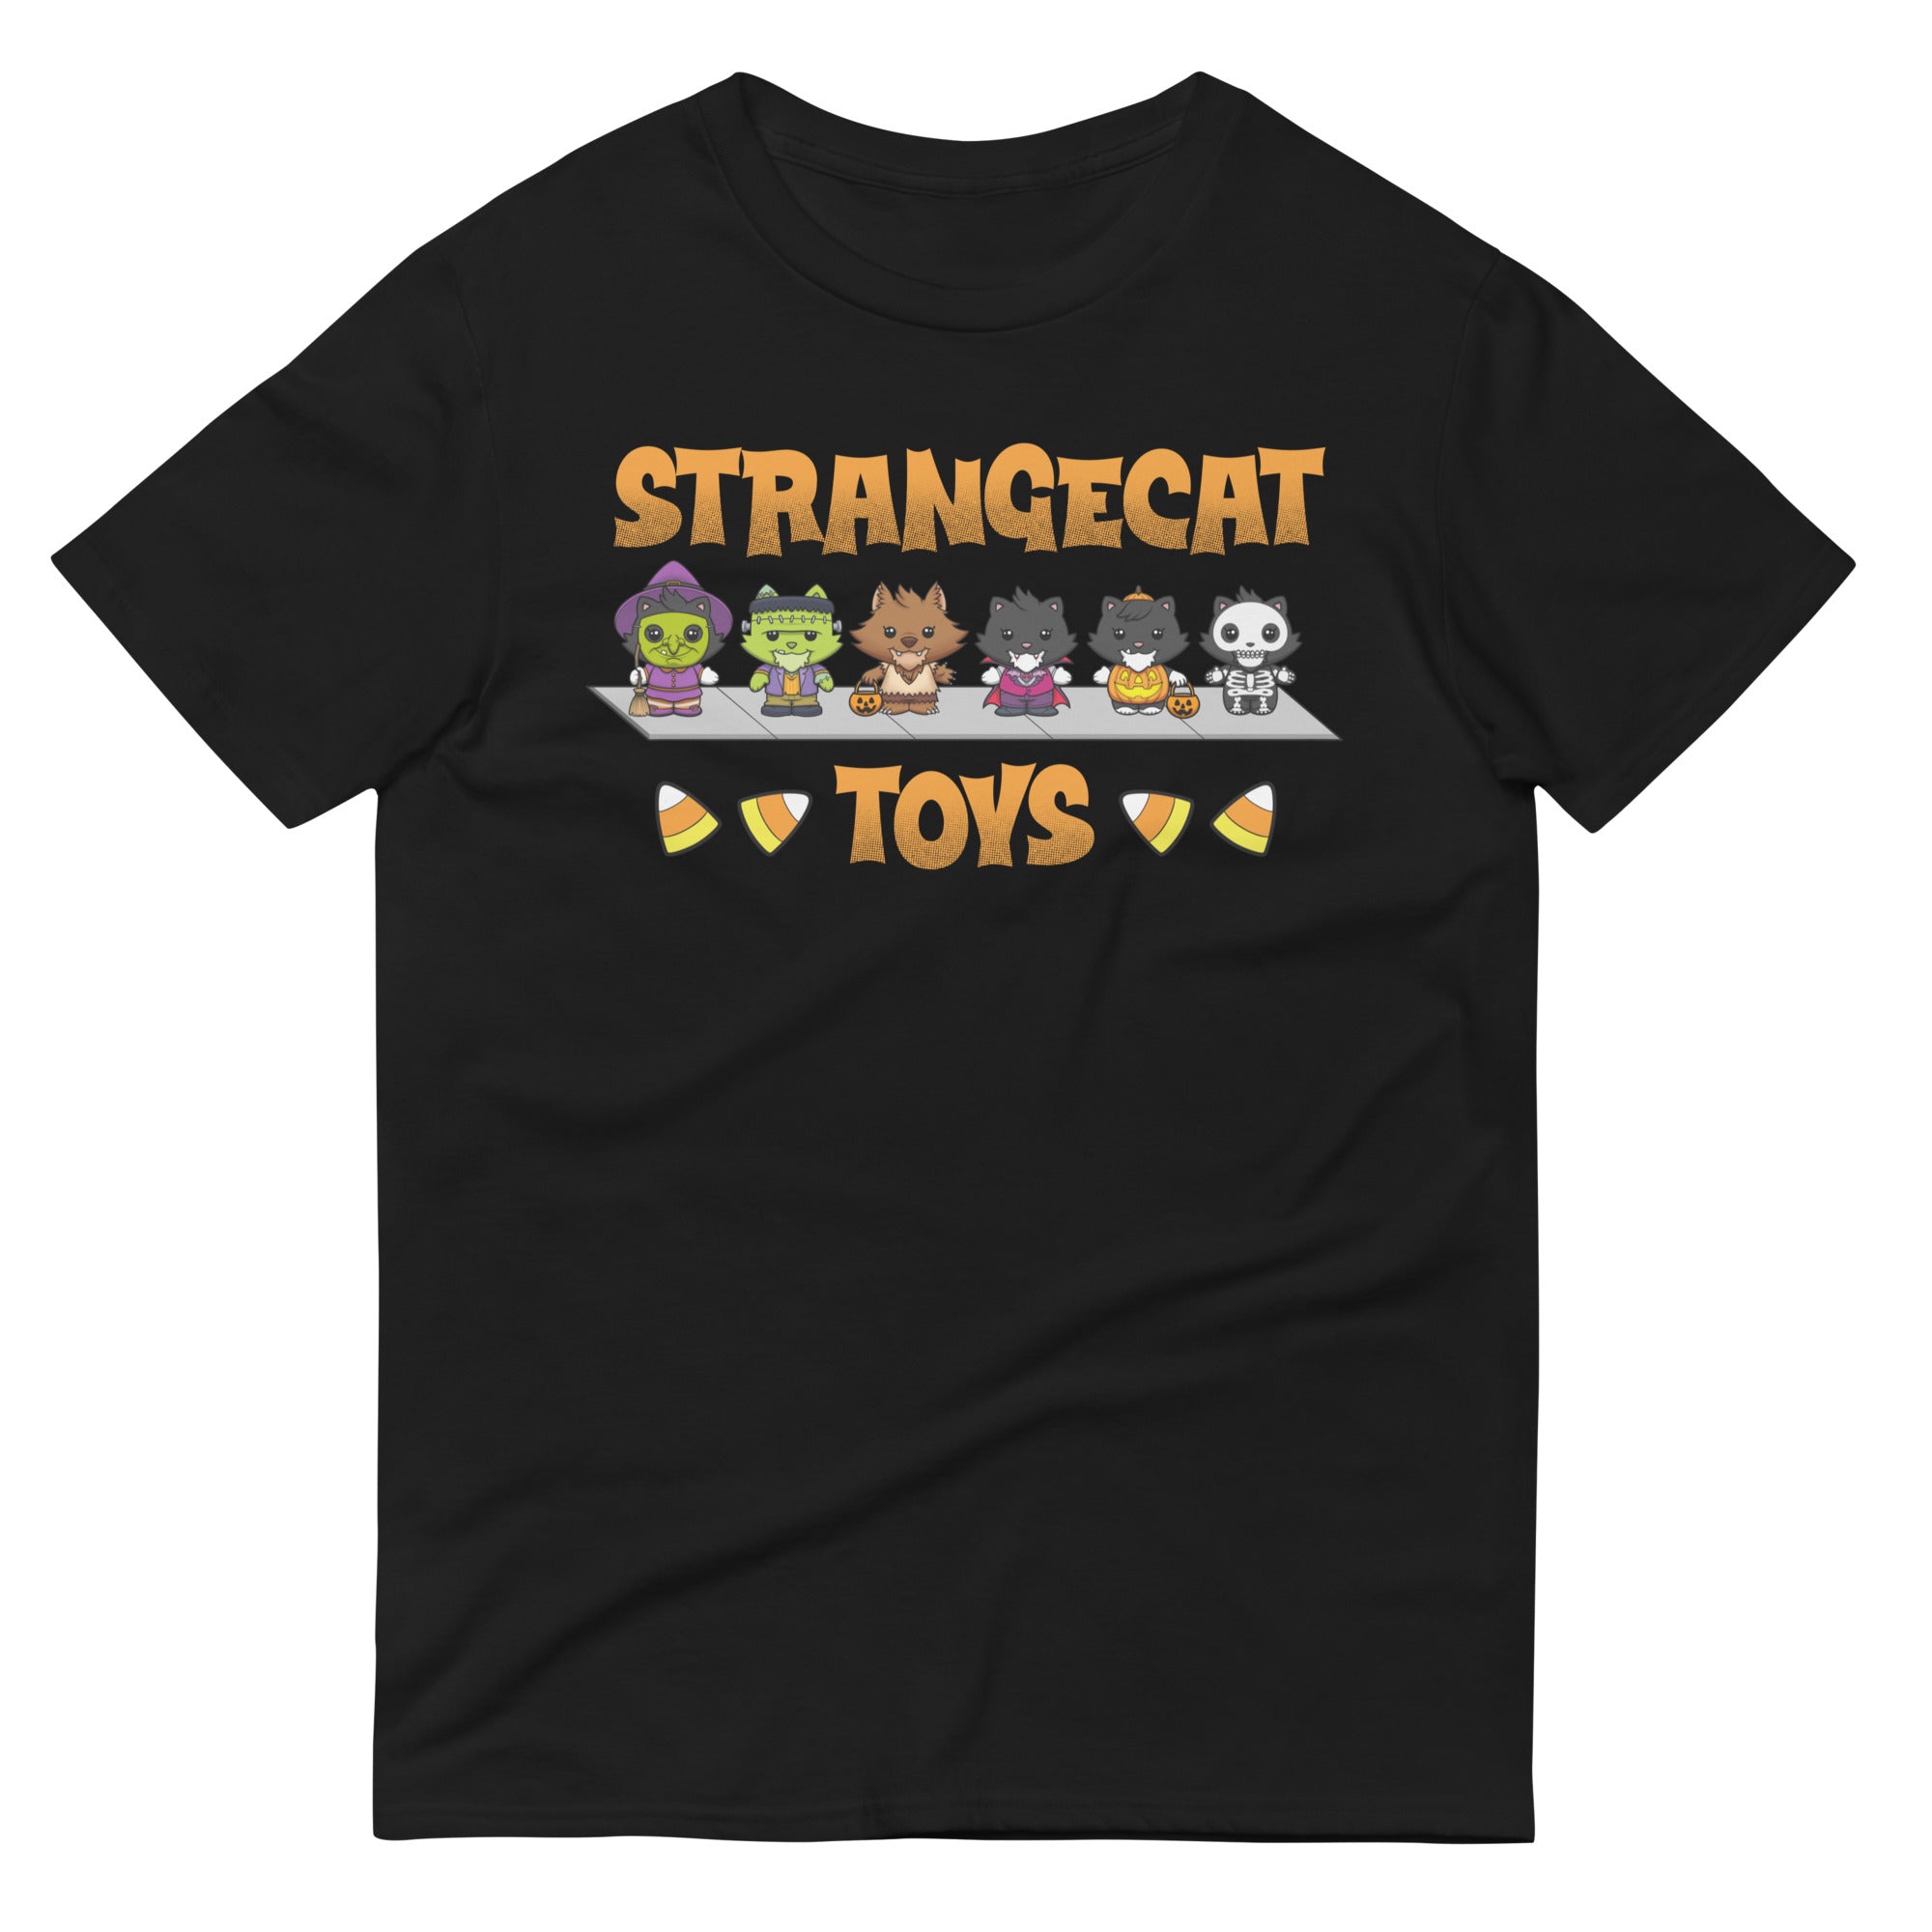 Trick Or Treat Strangecat T-Shirt featuring cartoon characters, cat, person, wolf, and more on a black shirt.